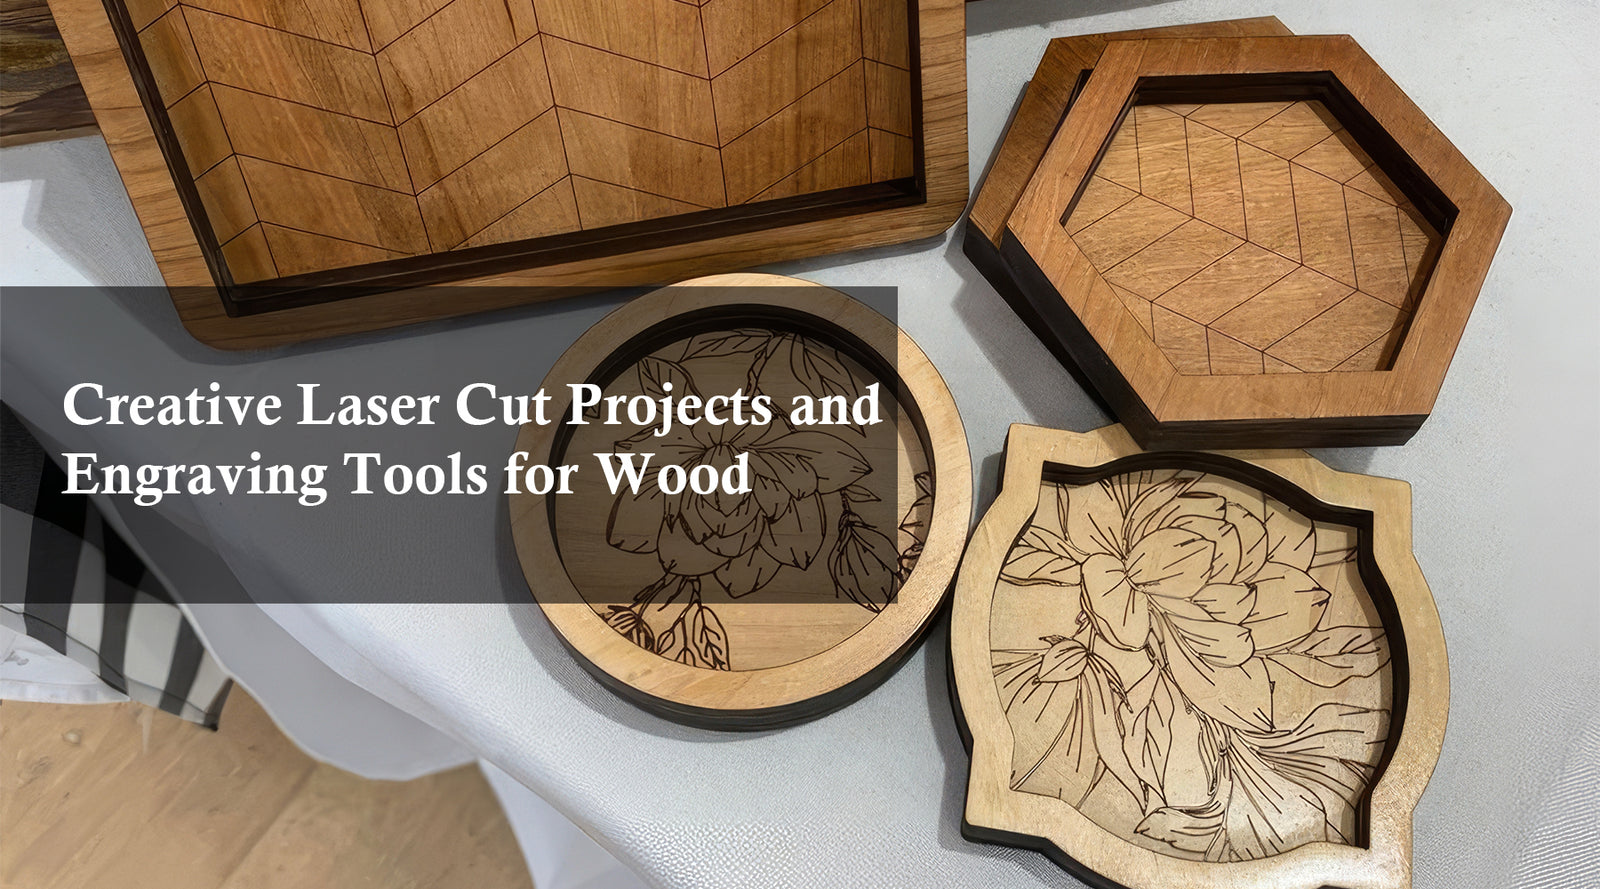 Creative Laser Cut Projects and Engraving Tools for Wood